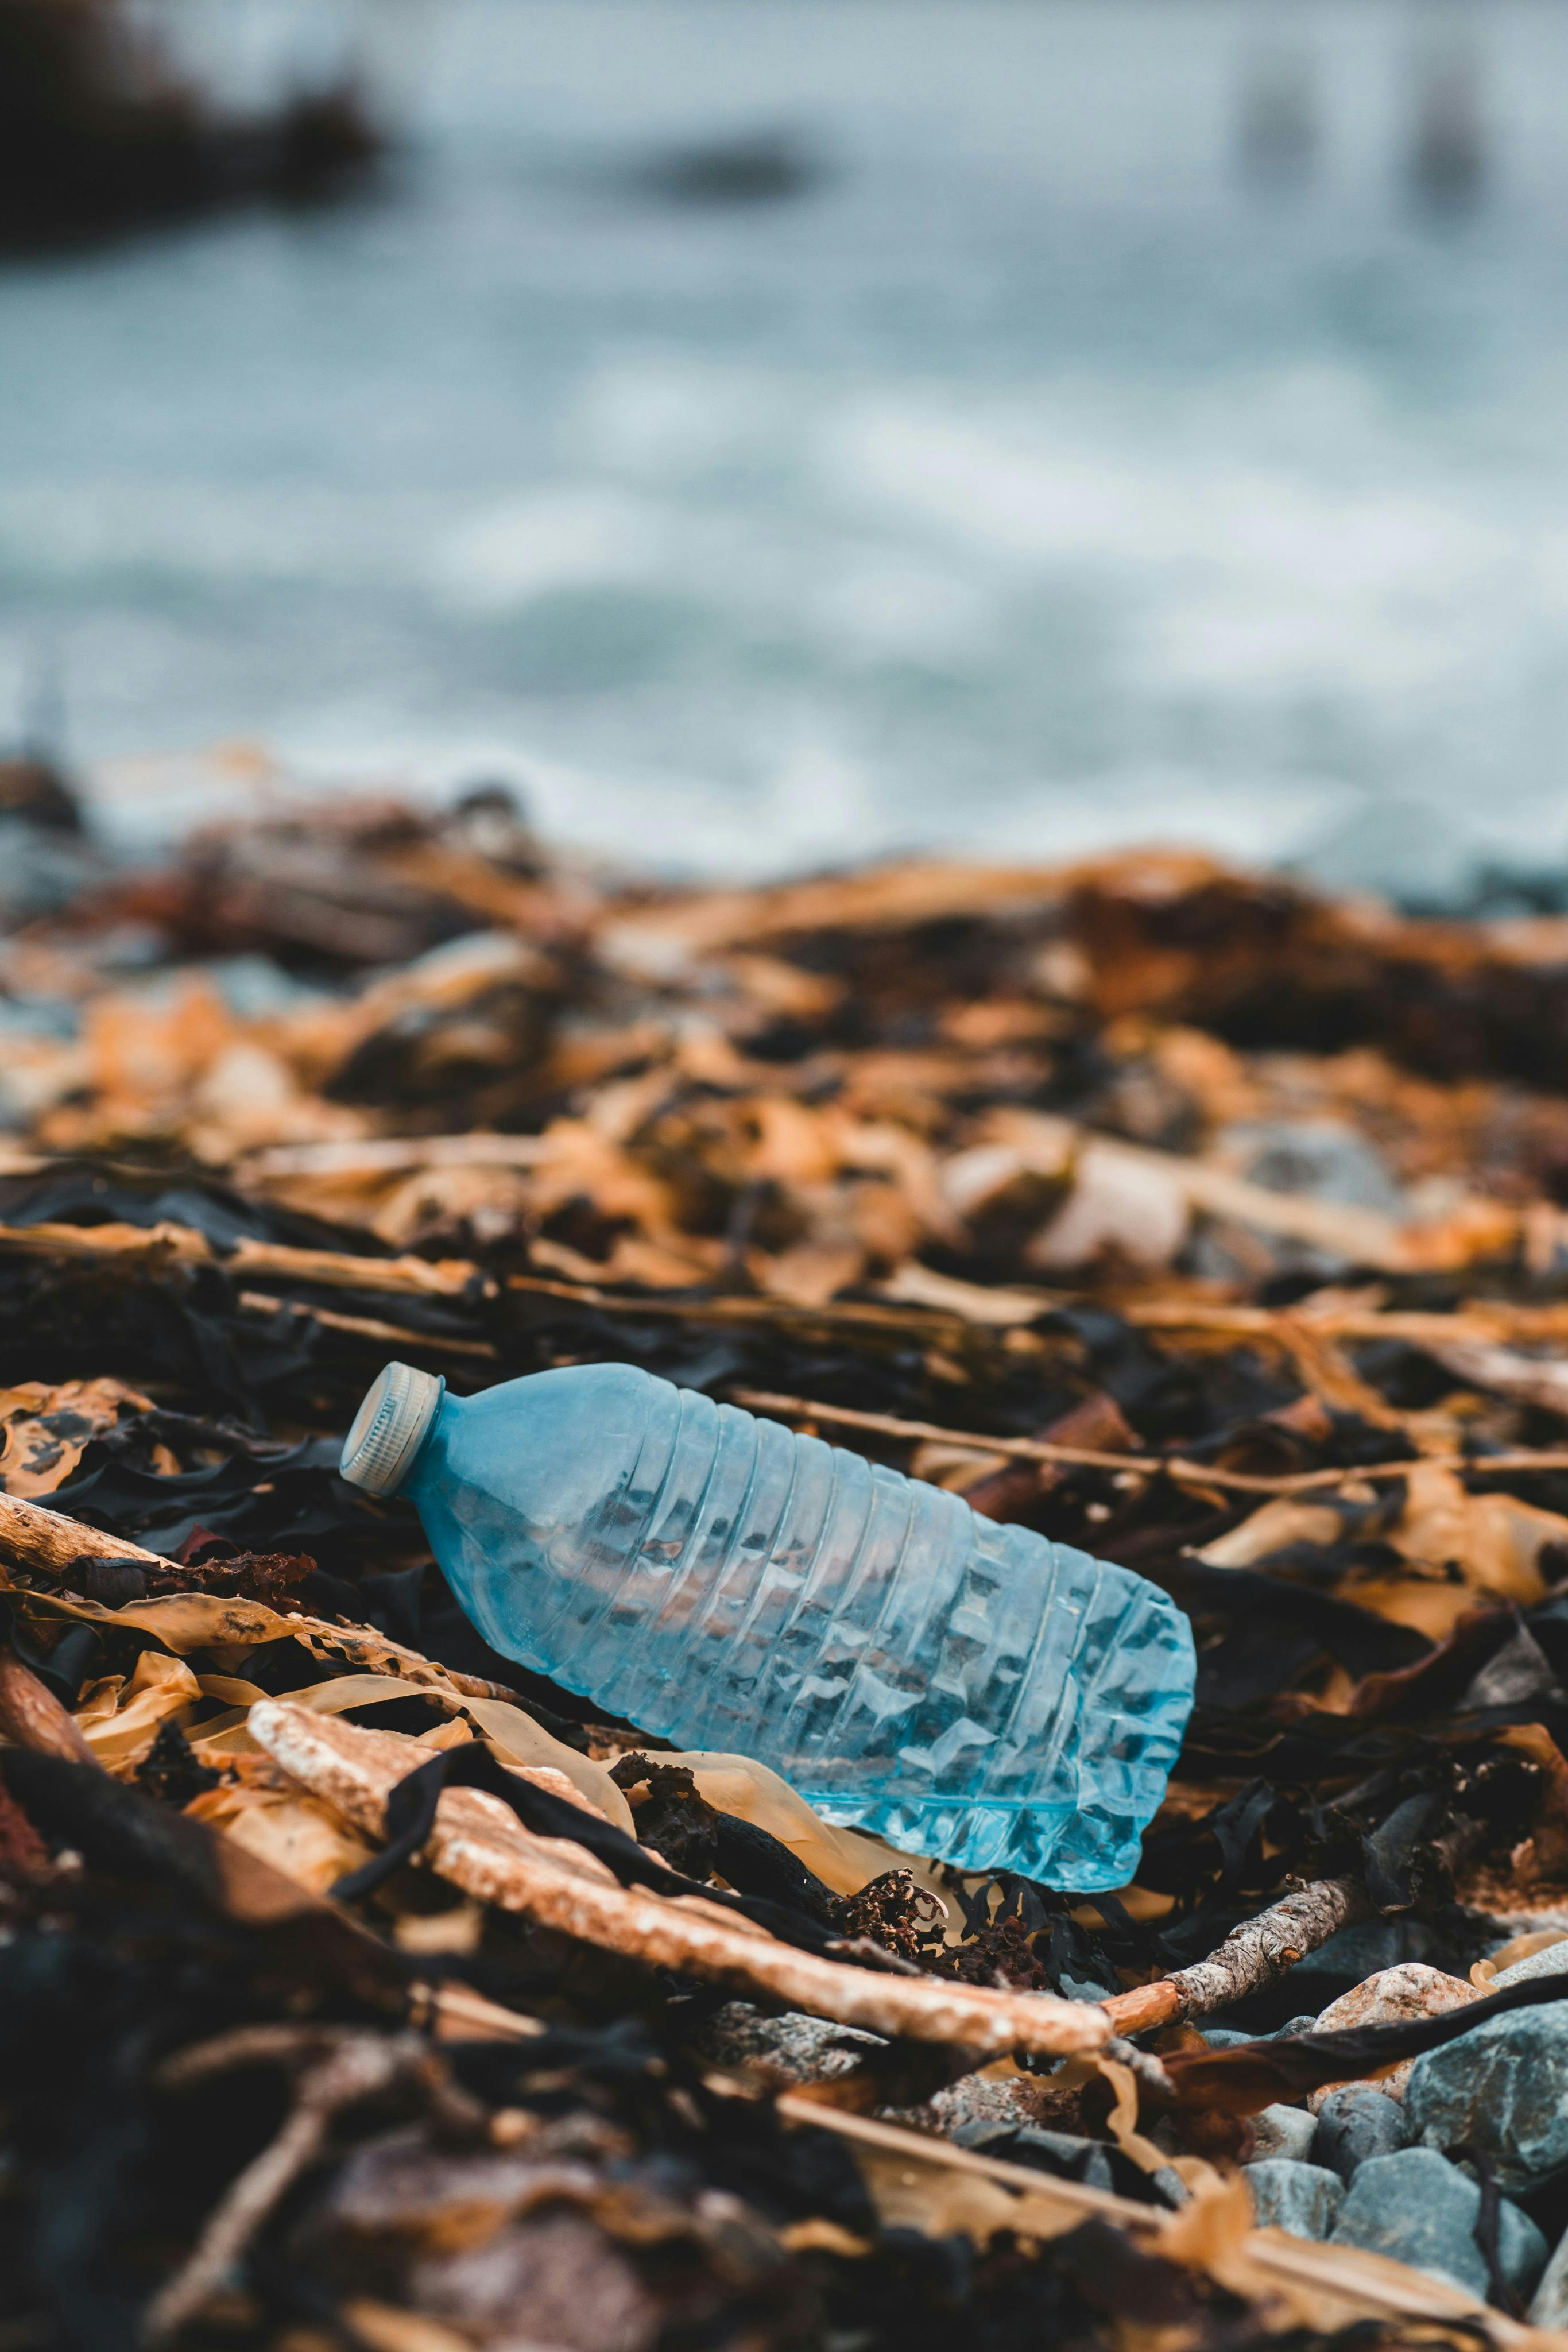 Photograph of a plastic bottle washed up on a beach